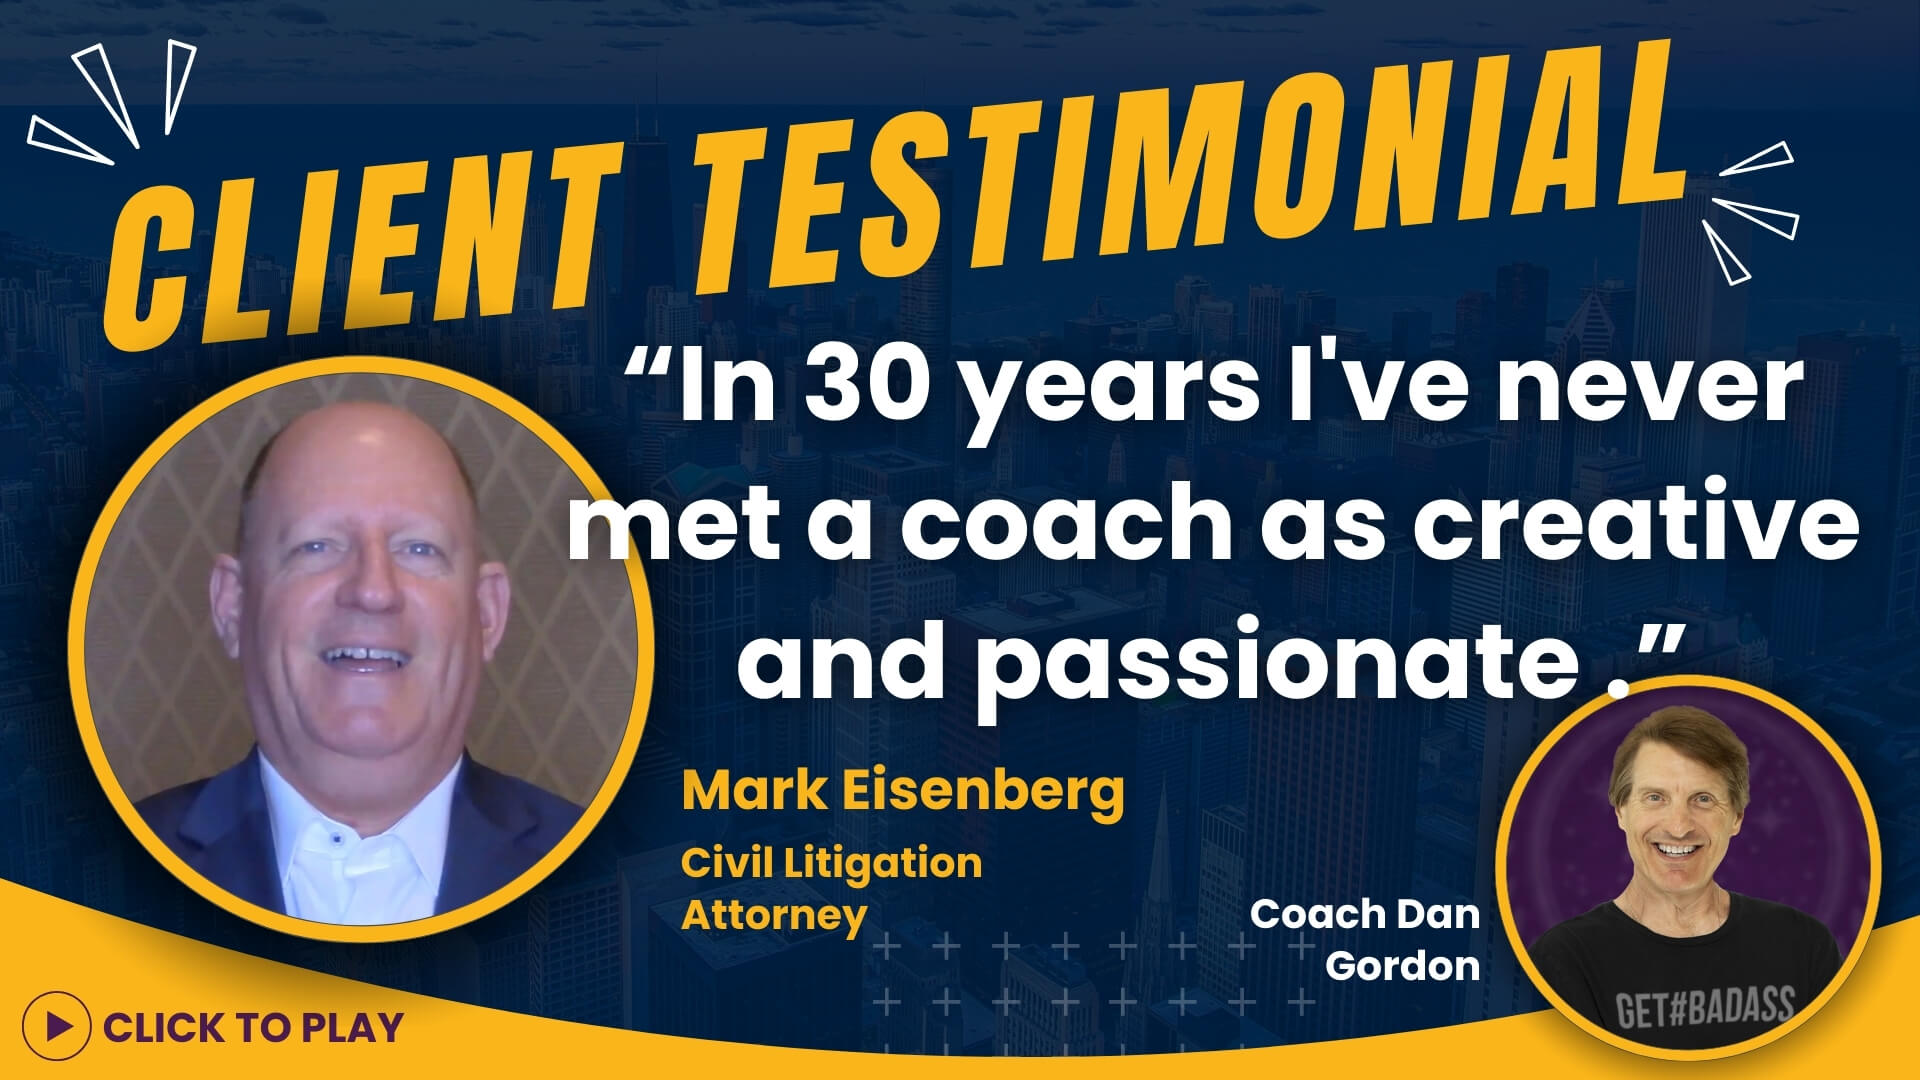 Mark Eisenberg, Civil Litigation Attorney, gives a video testimonial for Coach Dan Gordon, displayed with engaging portraits and a quote on creative and passionate coaching.